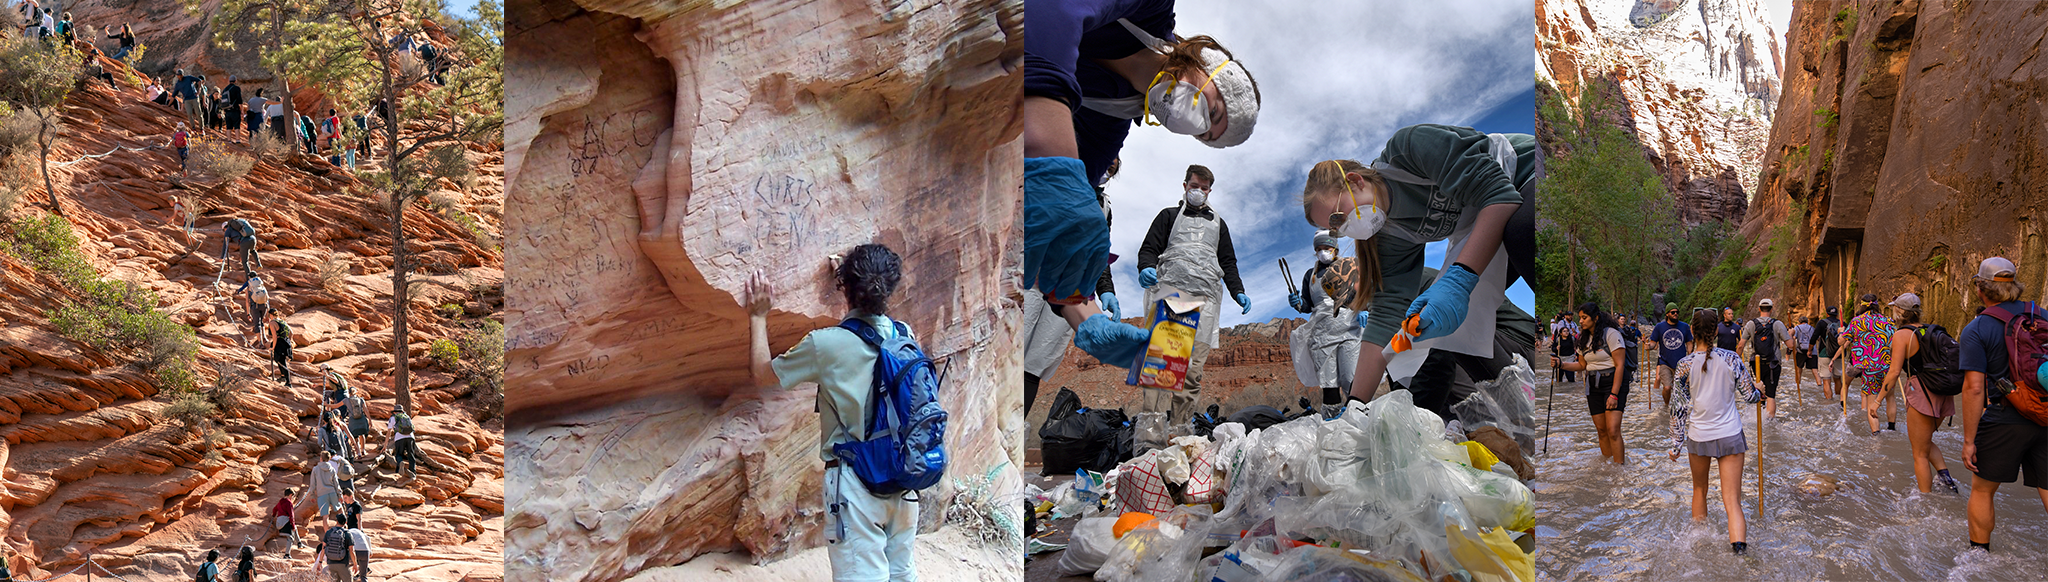 4 photos, left to right: a long line of people up an orange sandstone cliff, a person cleaning graffiti off of beige canyon walls, people with gloves, masks, and aprons sorting trash, a large group of people hiking in a river between canyon walls